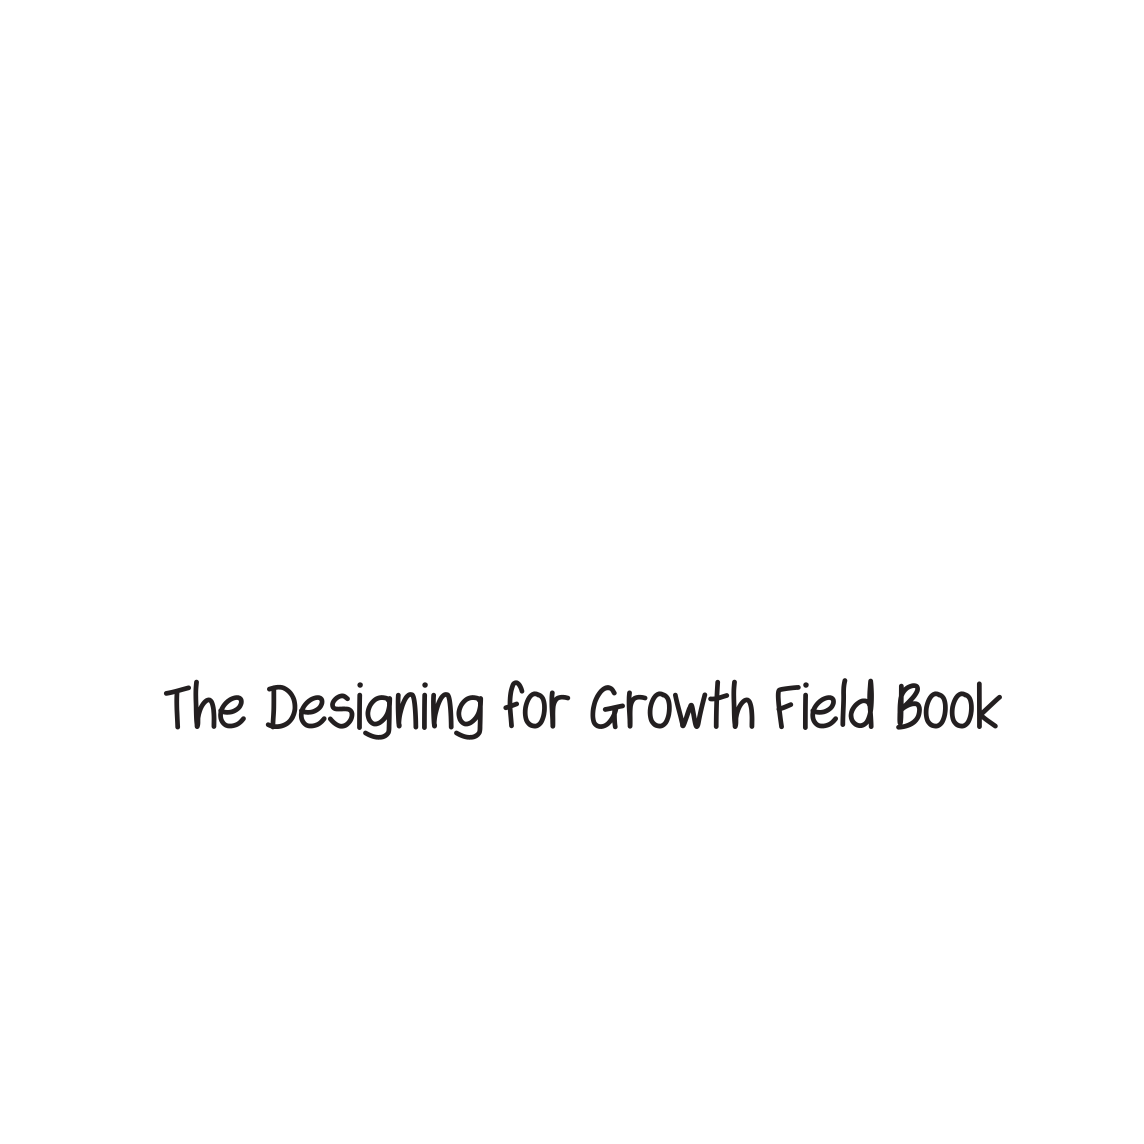 The Designing for Growth Field Book page i